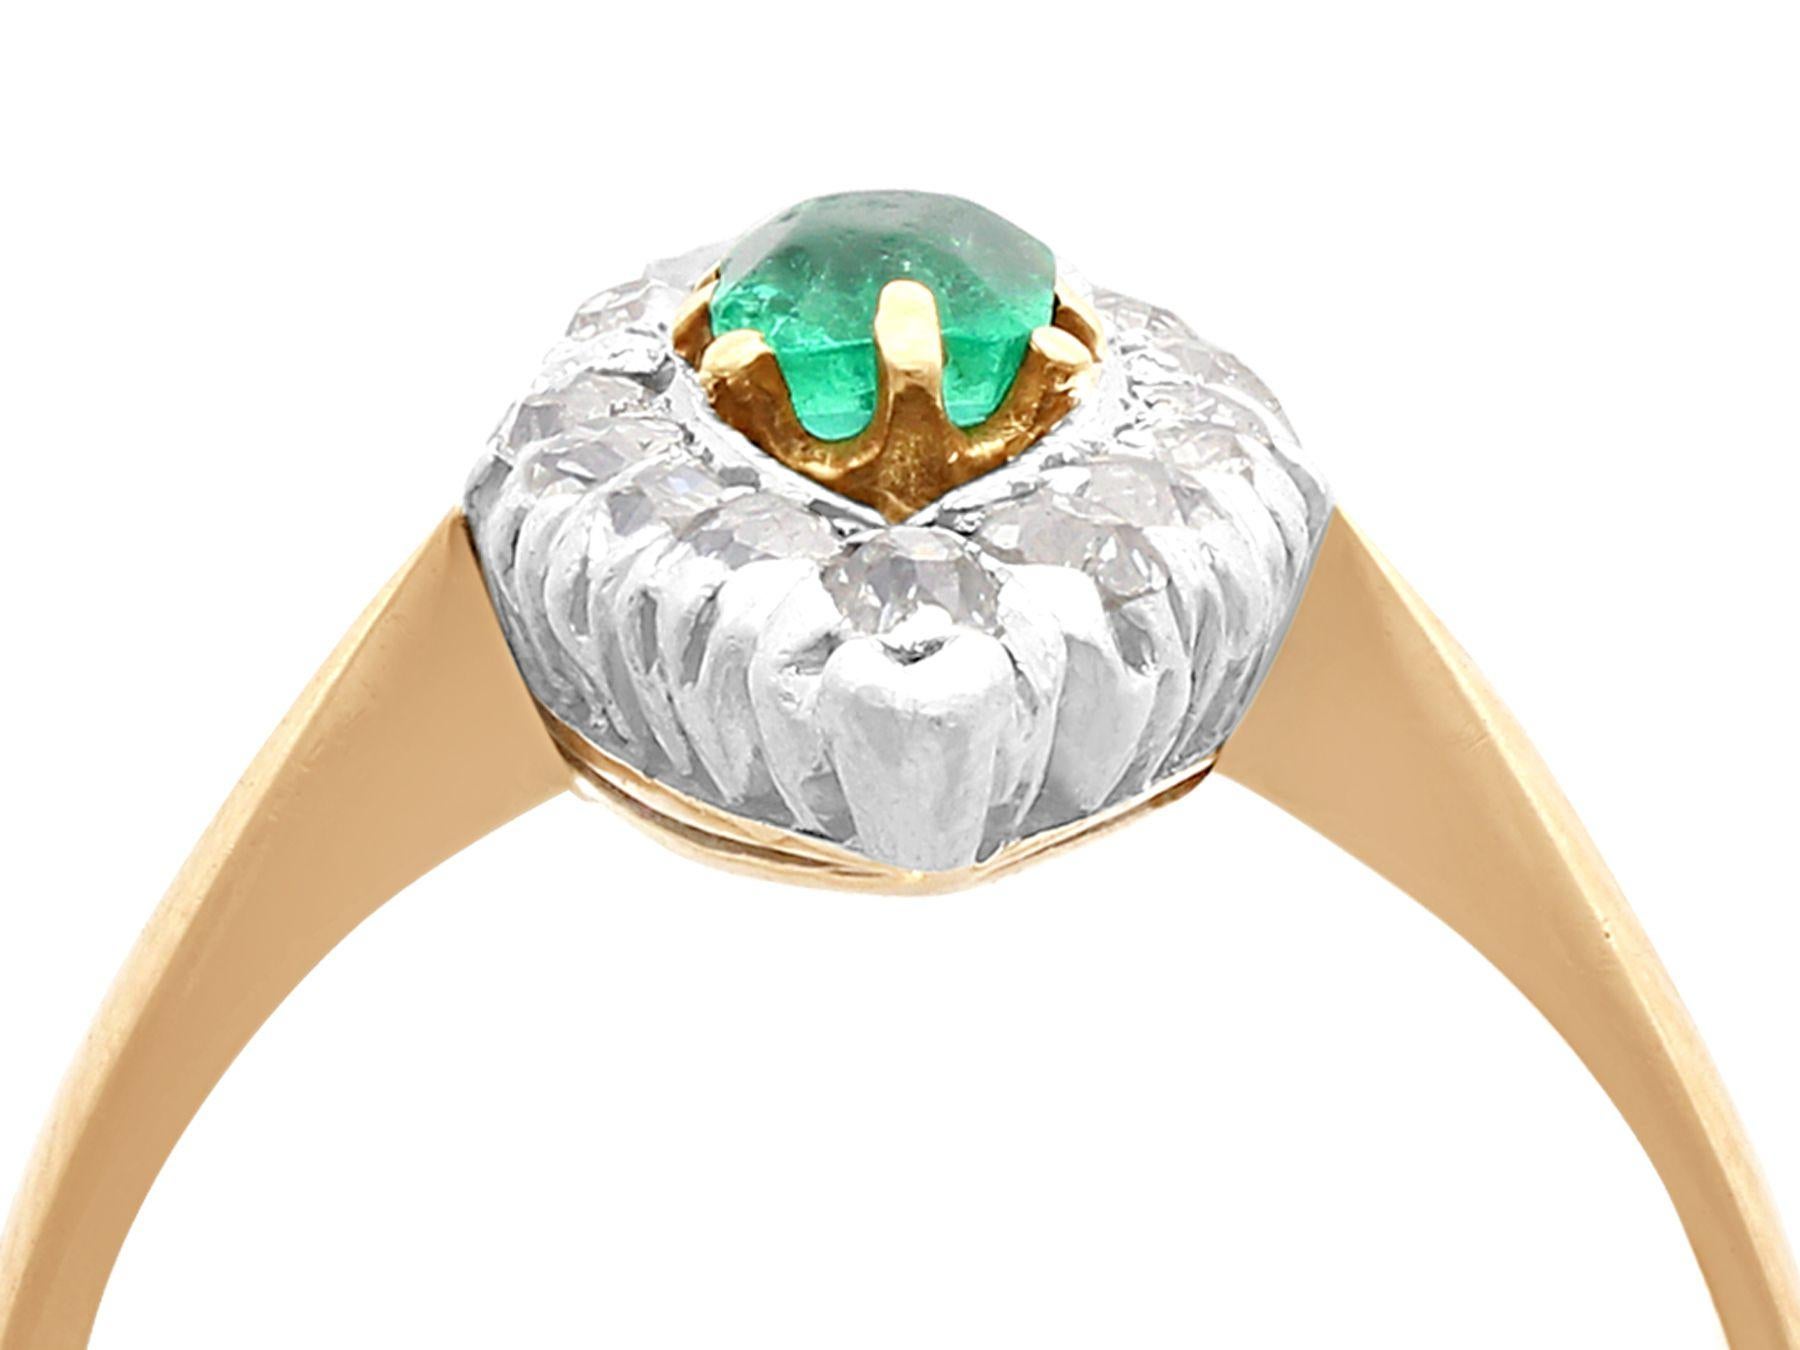 A fine and impressive antique 0.32 carat natural emerald and 0.48 carat diamond, 14 karat yellow gold, platinum set marquise dress ring; part of our antique jewelry and estate jewelry collections

This impressive antique emerald and diamond dress